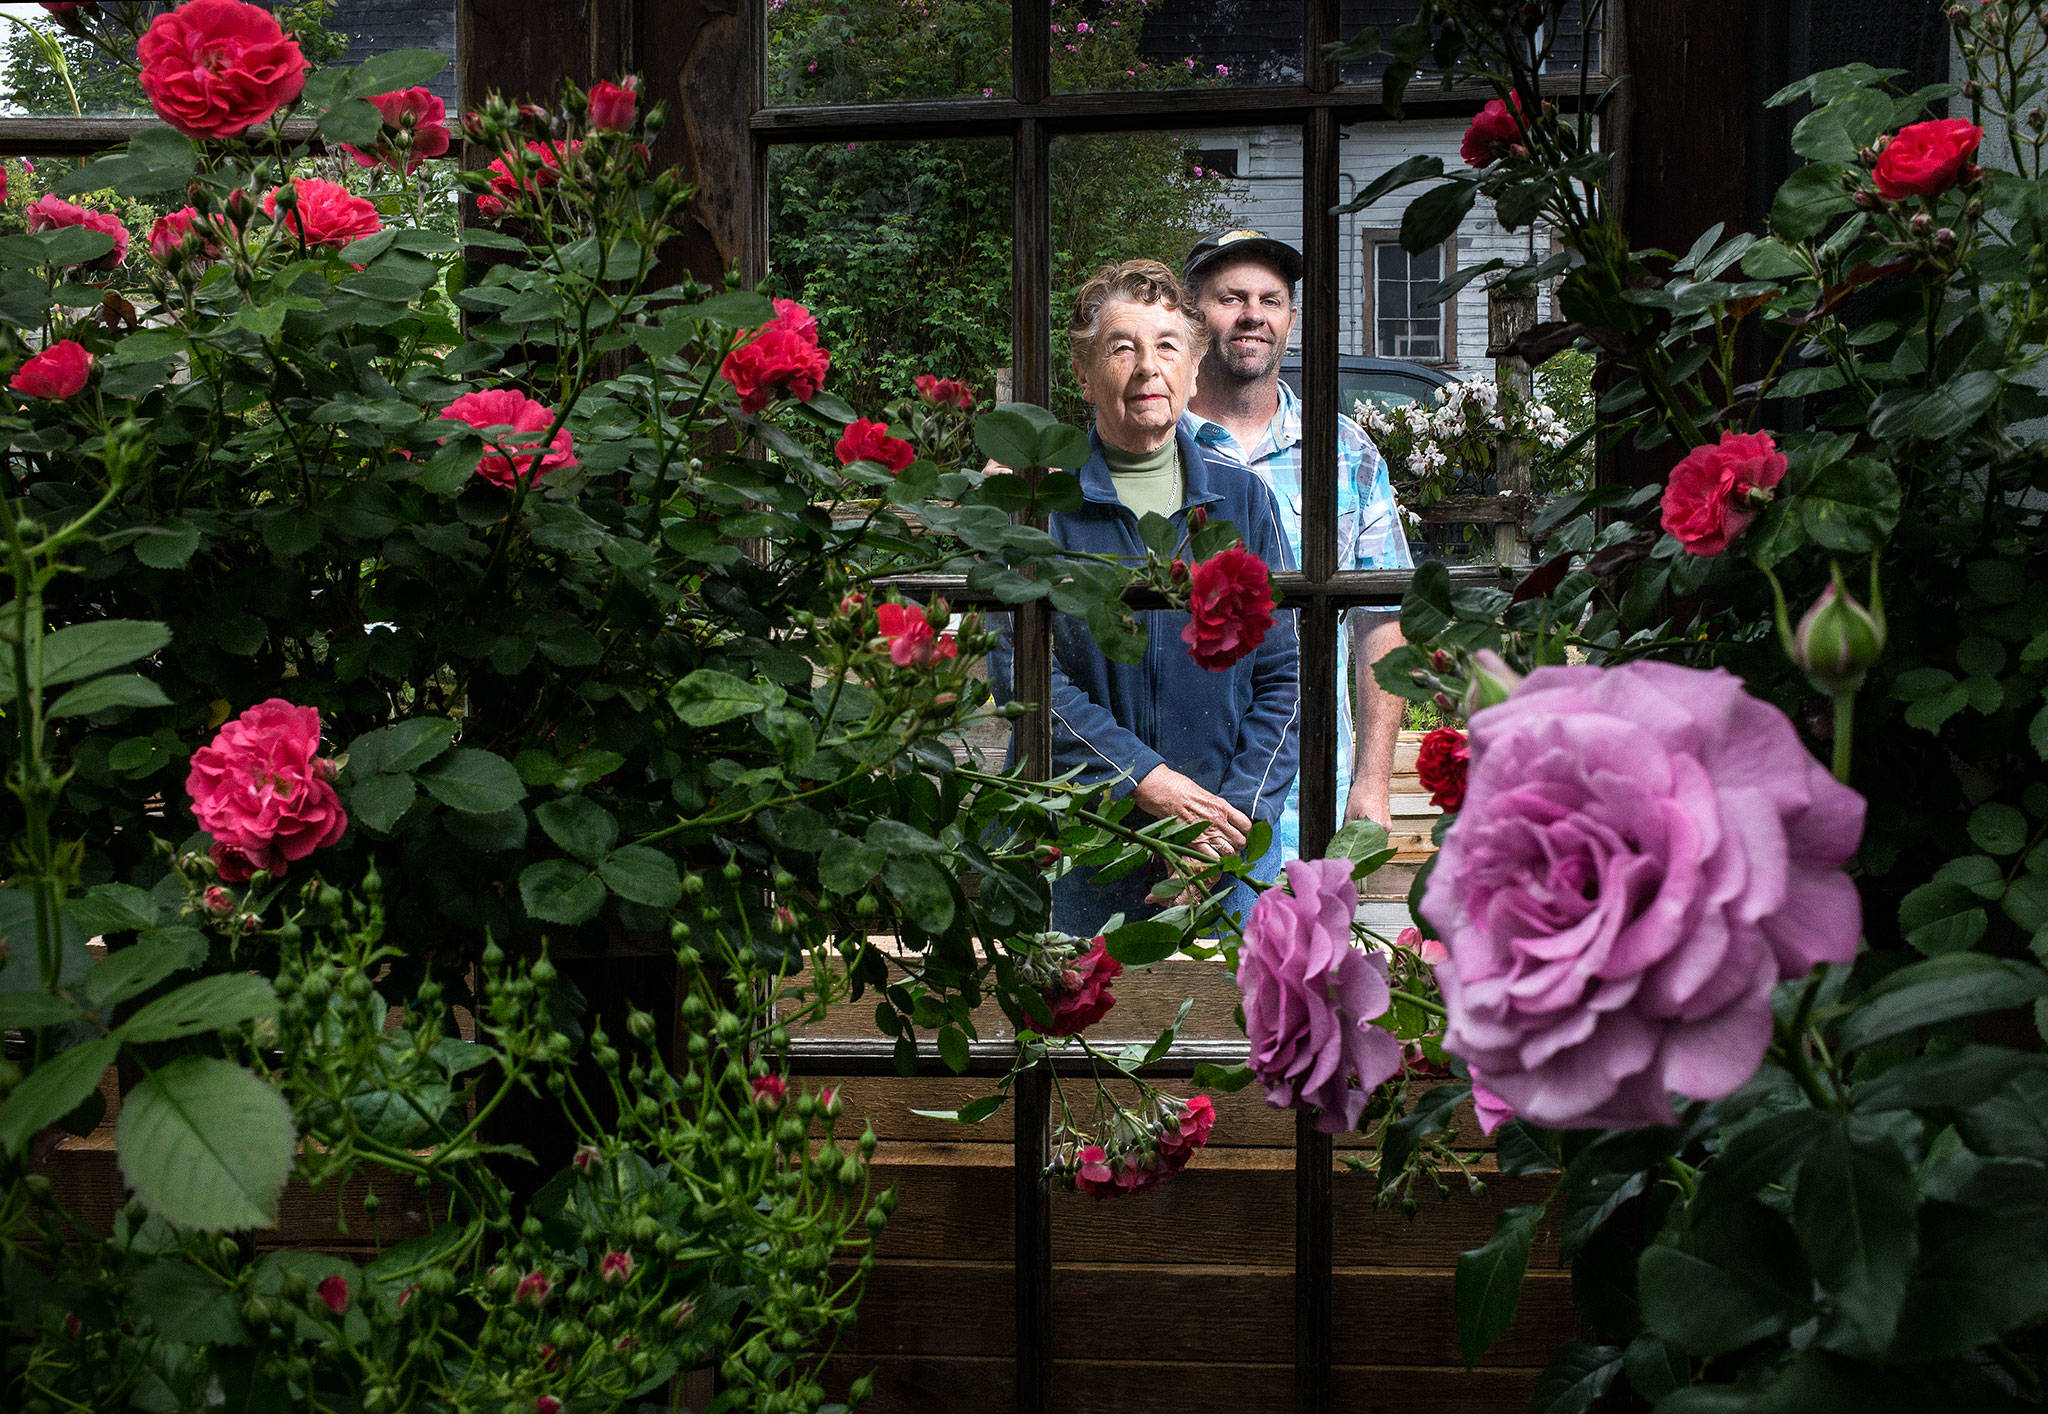 Antique Rose Farm owner Jackie McElhose and her son, farm manager Jeff McElhose, stand among some of the many roses grown at their Snohomish-area business. (Andy Bronson / The Herald)